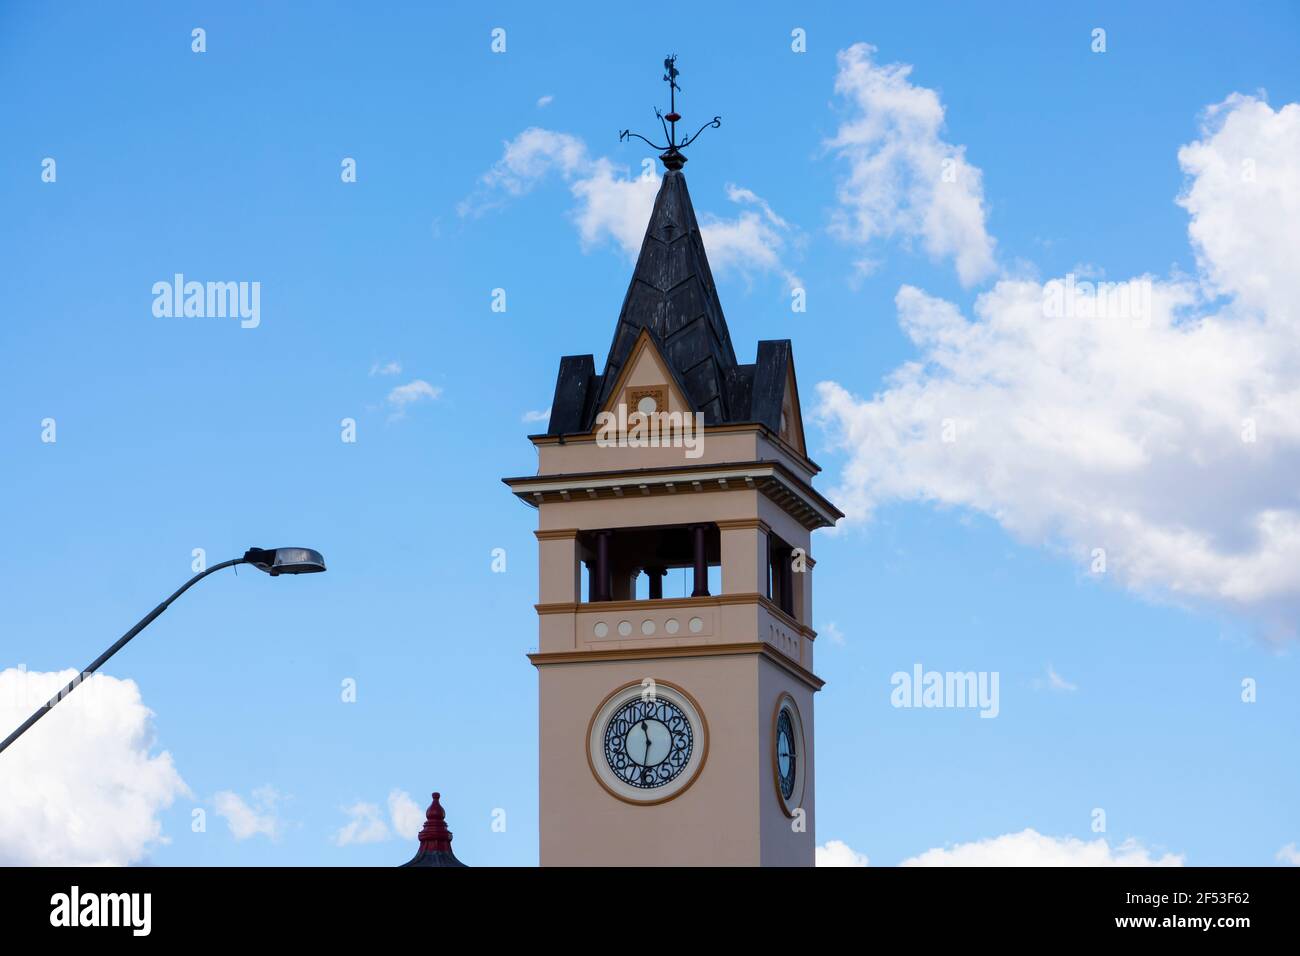 The clock tower on the old Telegraph Office building in Charters Towers, Queensland, Australia which is now a post office. Stock Photo